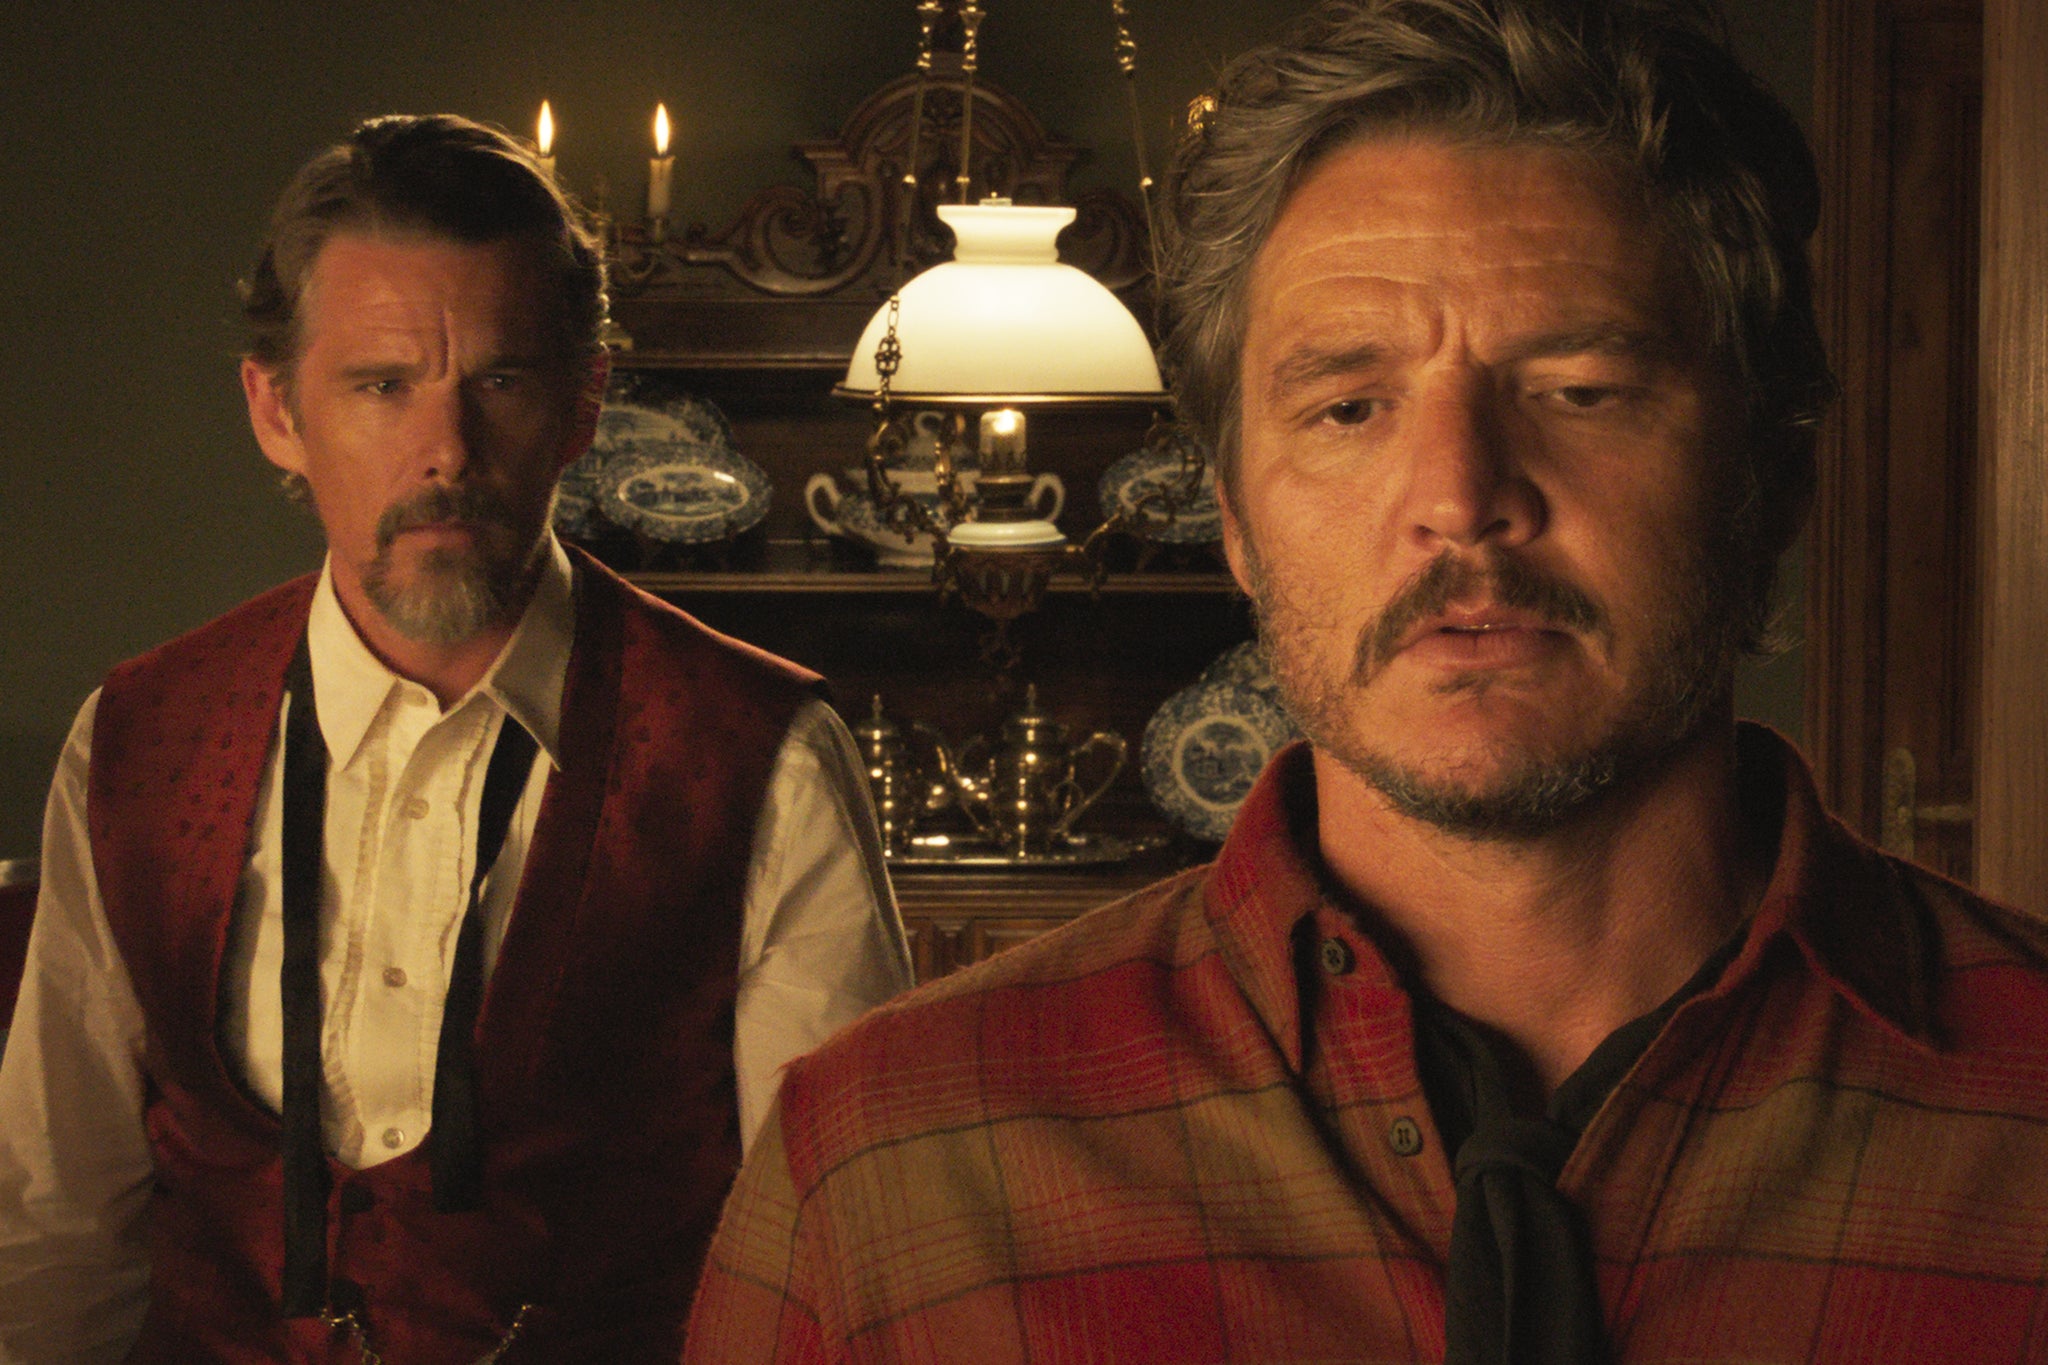 Here come cowboys: Ethan Hawke and Pedro Pascal in ‘Strange Way of Life’